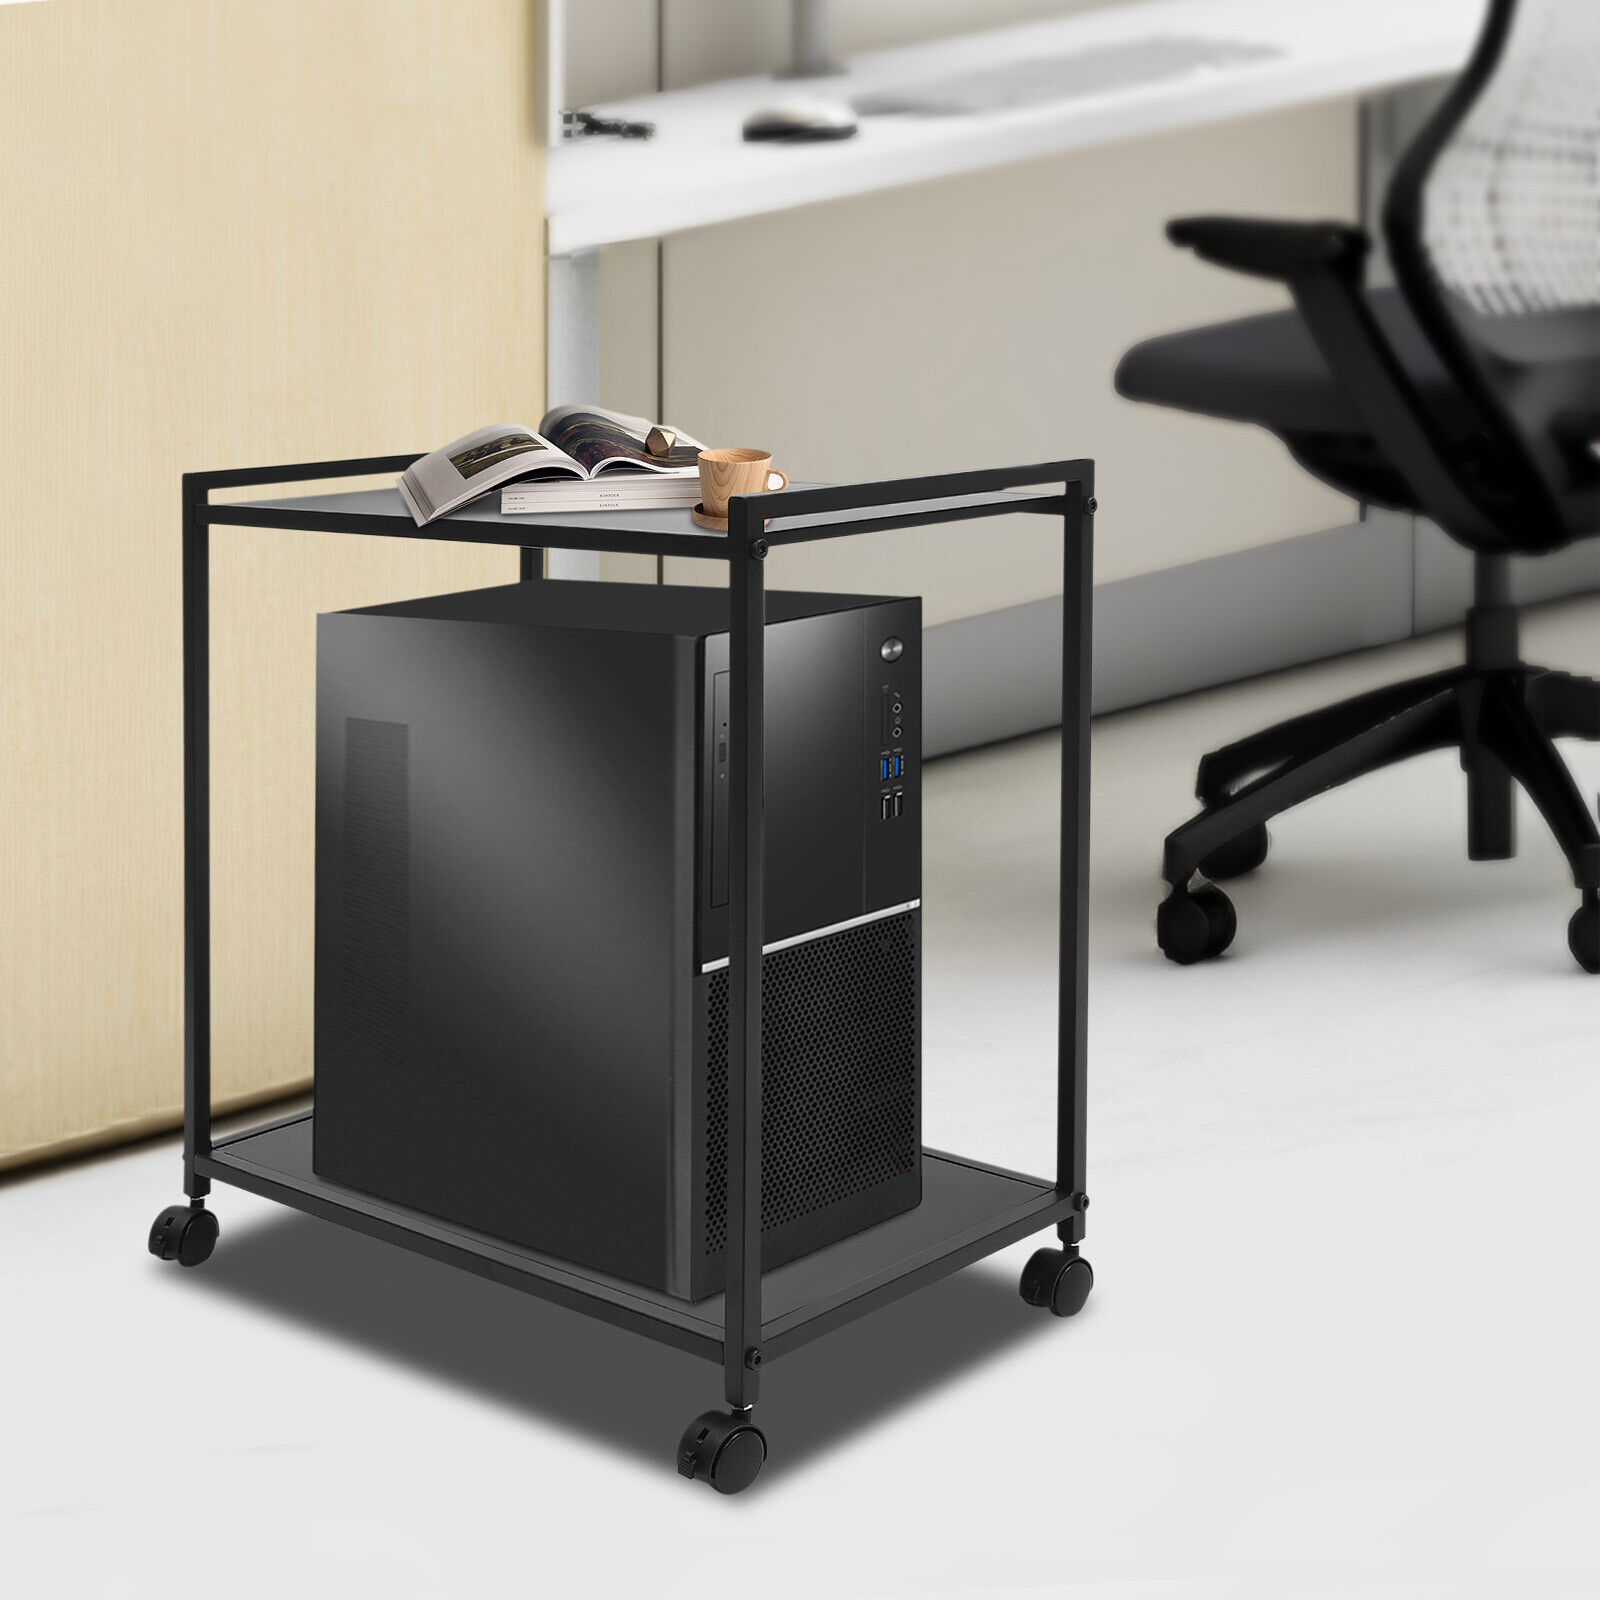 2-Tier Cart Computer Tower Stand Rolling PC Tower Holder with Storage Drawer